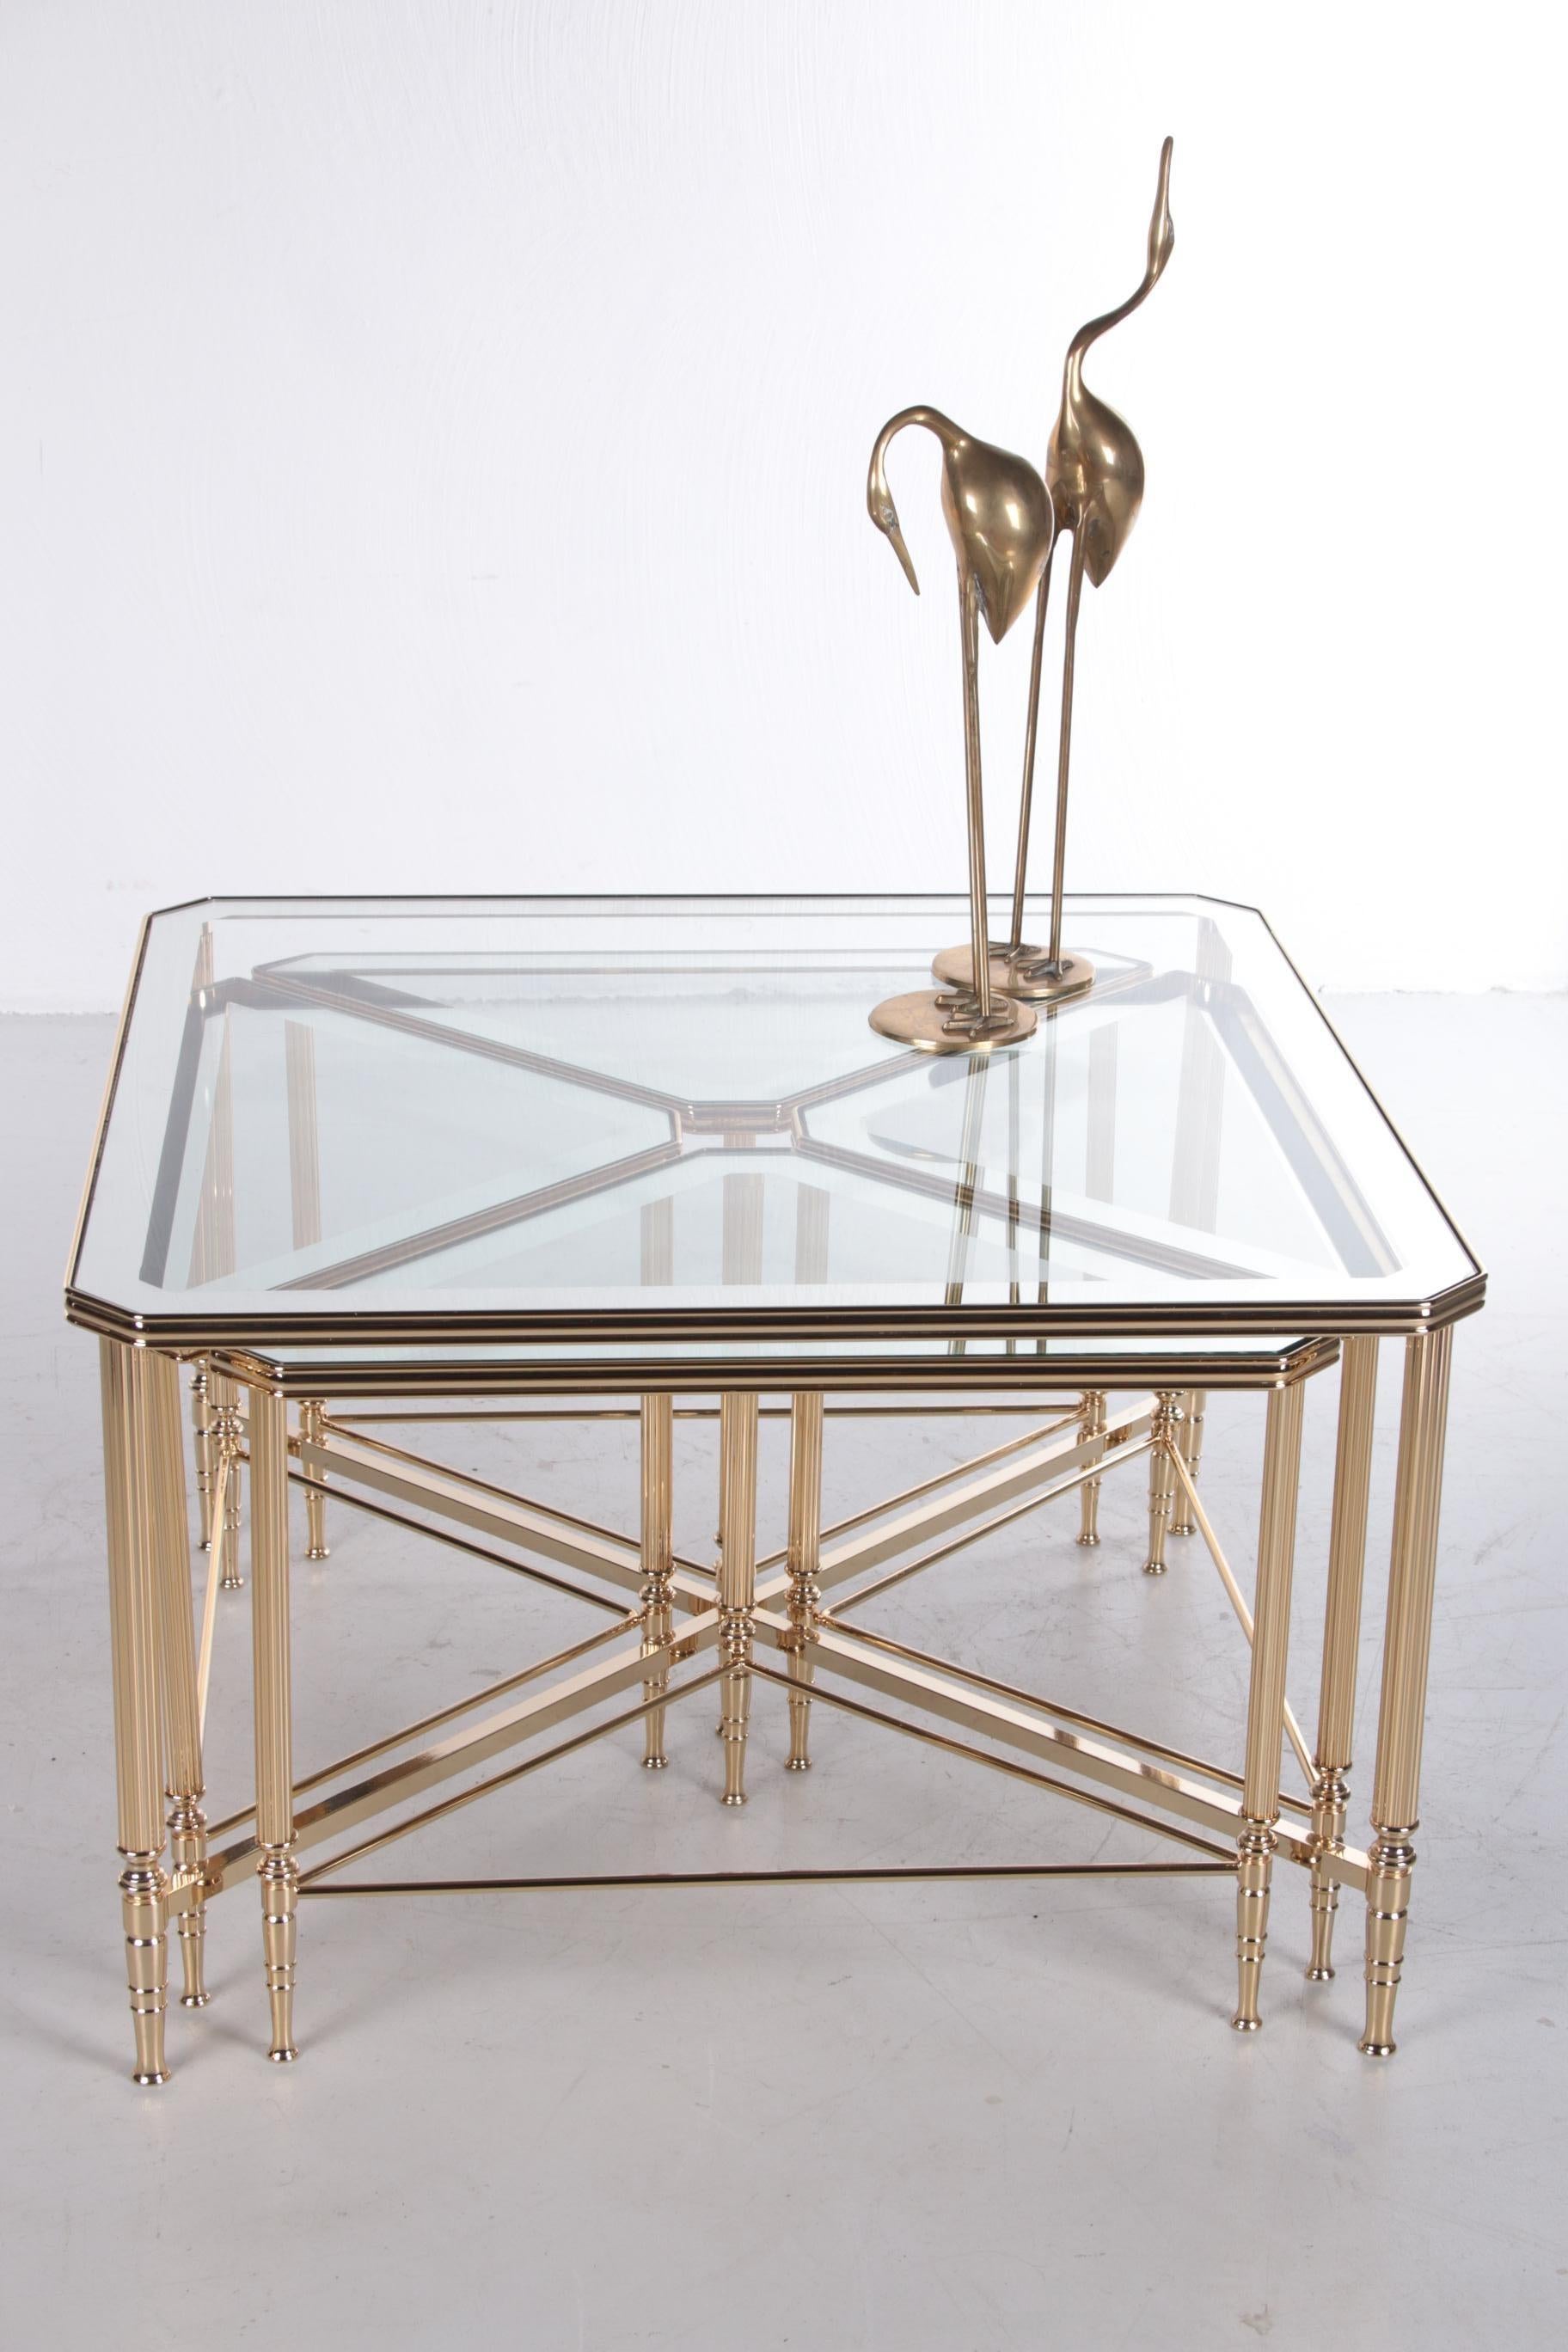 Beautiful classic Hollywood Regency coffee/cocktail table, with four triangular side tables nesting under the square master table.

The glass tops have a silver mirror edge, and the glass is original and in good condition. The gold-colored frame is